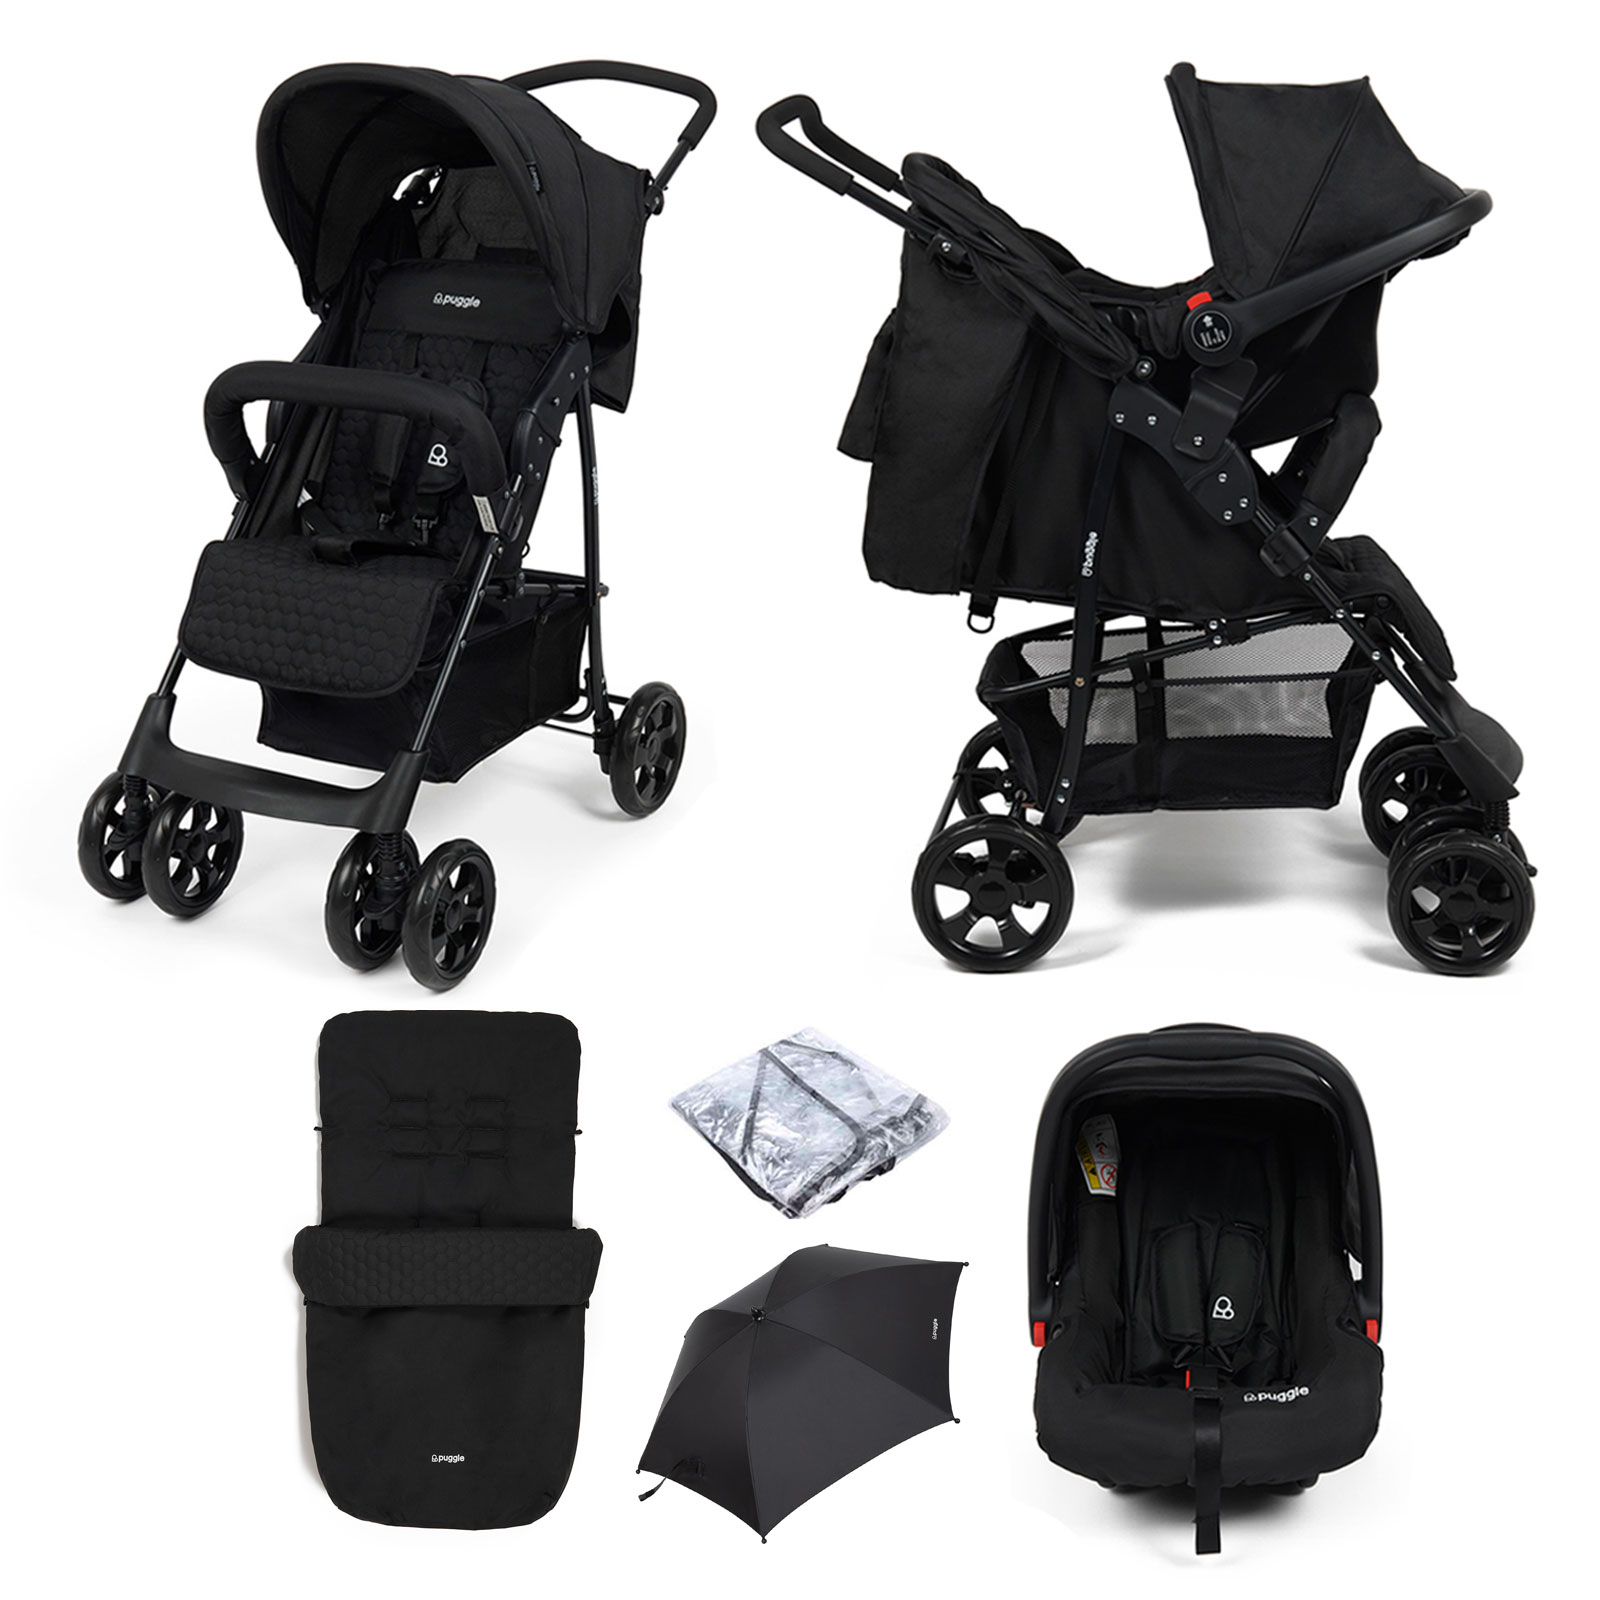 Puggle Lowton Luxe 2in1 Travel System with Raincover, Universal Honeycomb Footmuff & Parasol – Storm Black